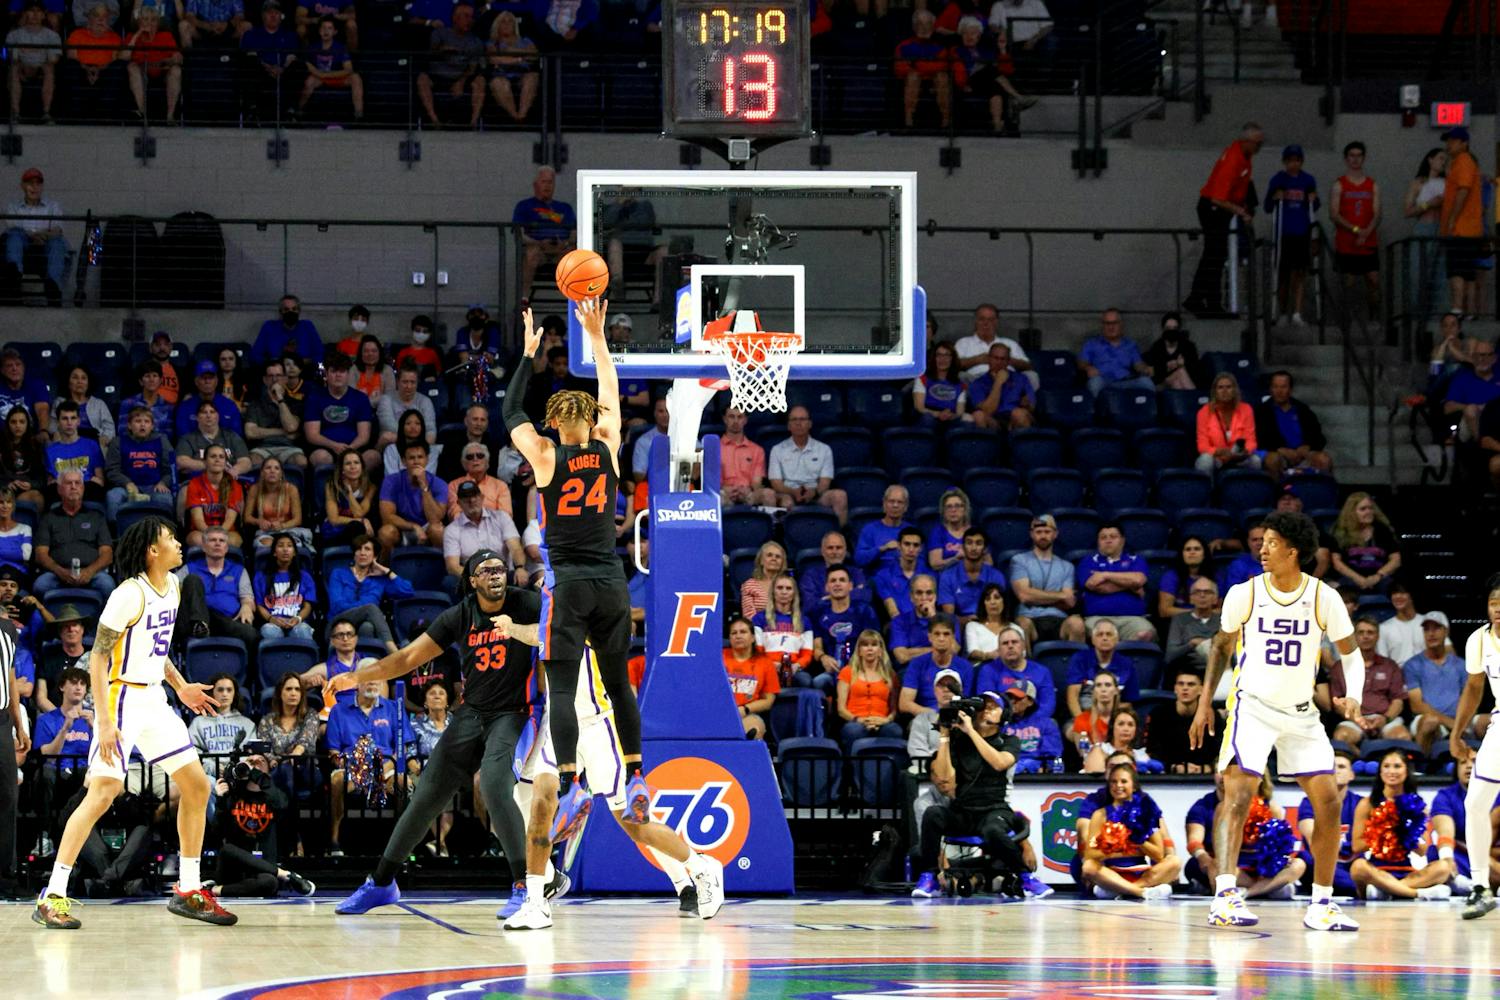 Florida guard Riley Kugel takes a jump shot in the Gators' 79-67 win against the Louisiana State Tigers Saturday, March 4, 2023. Kugel finished the game with a team-high 21 points.